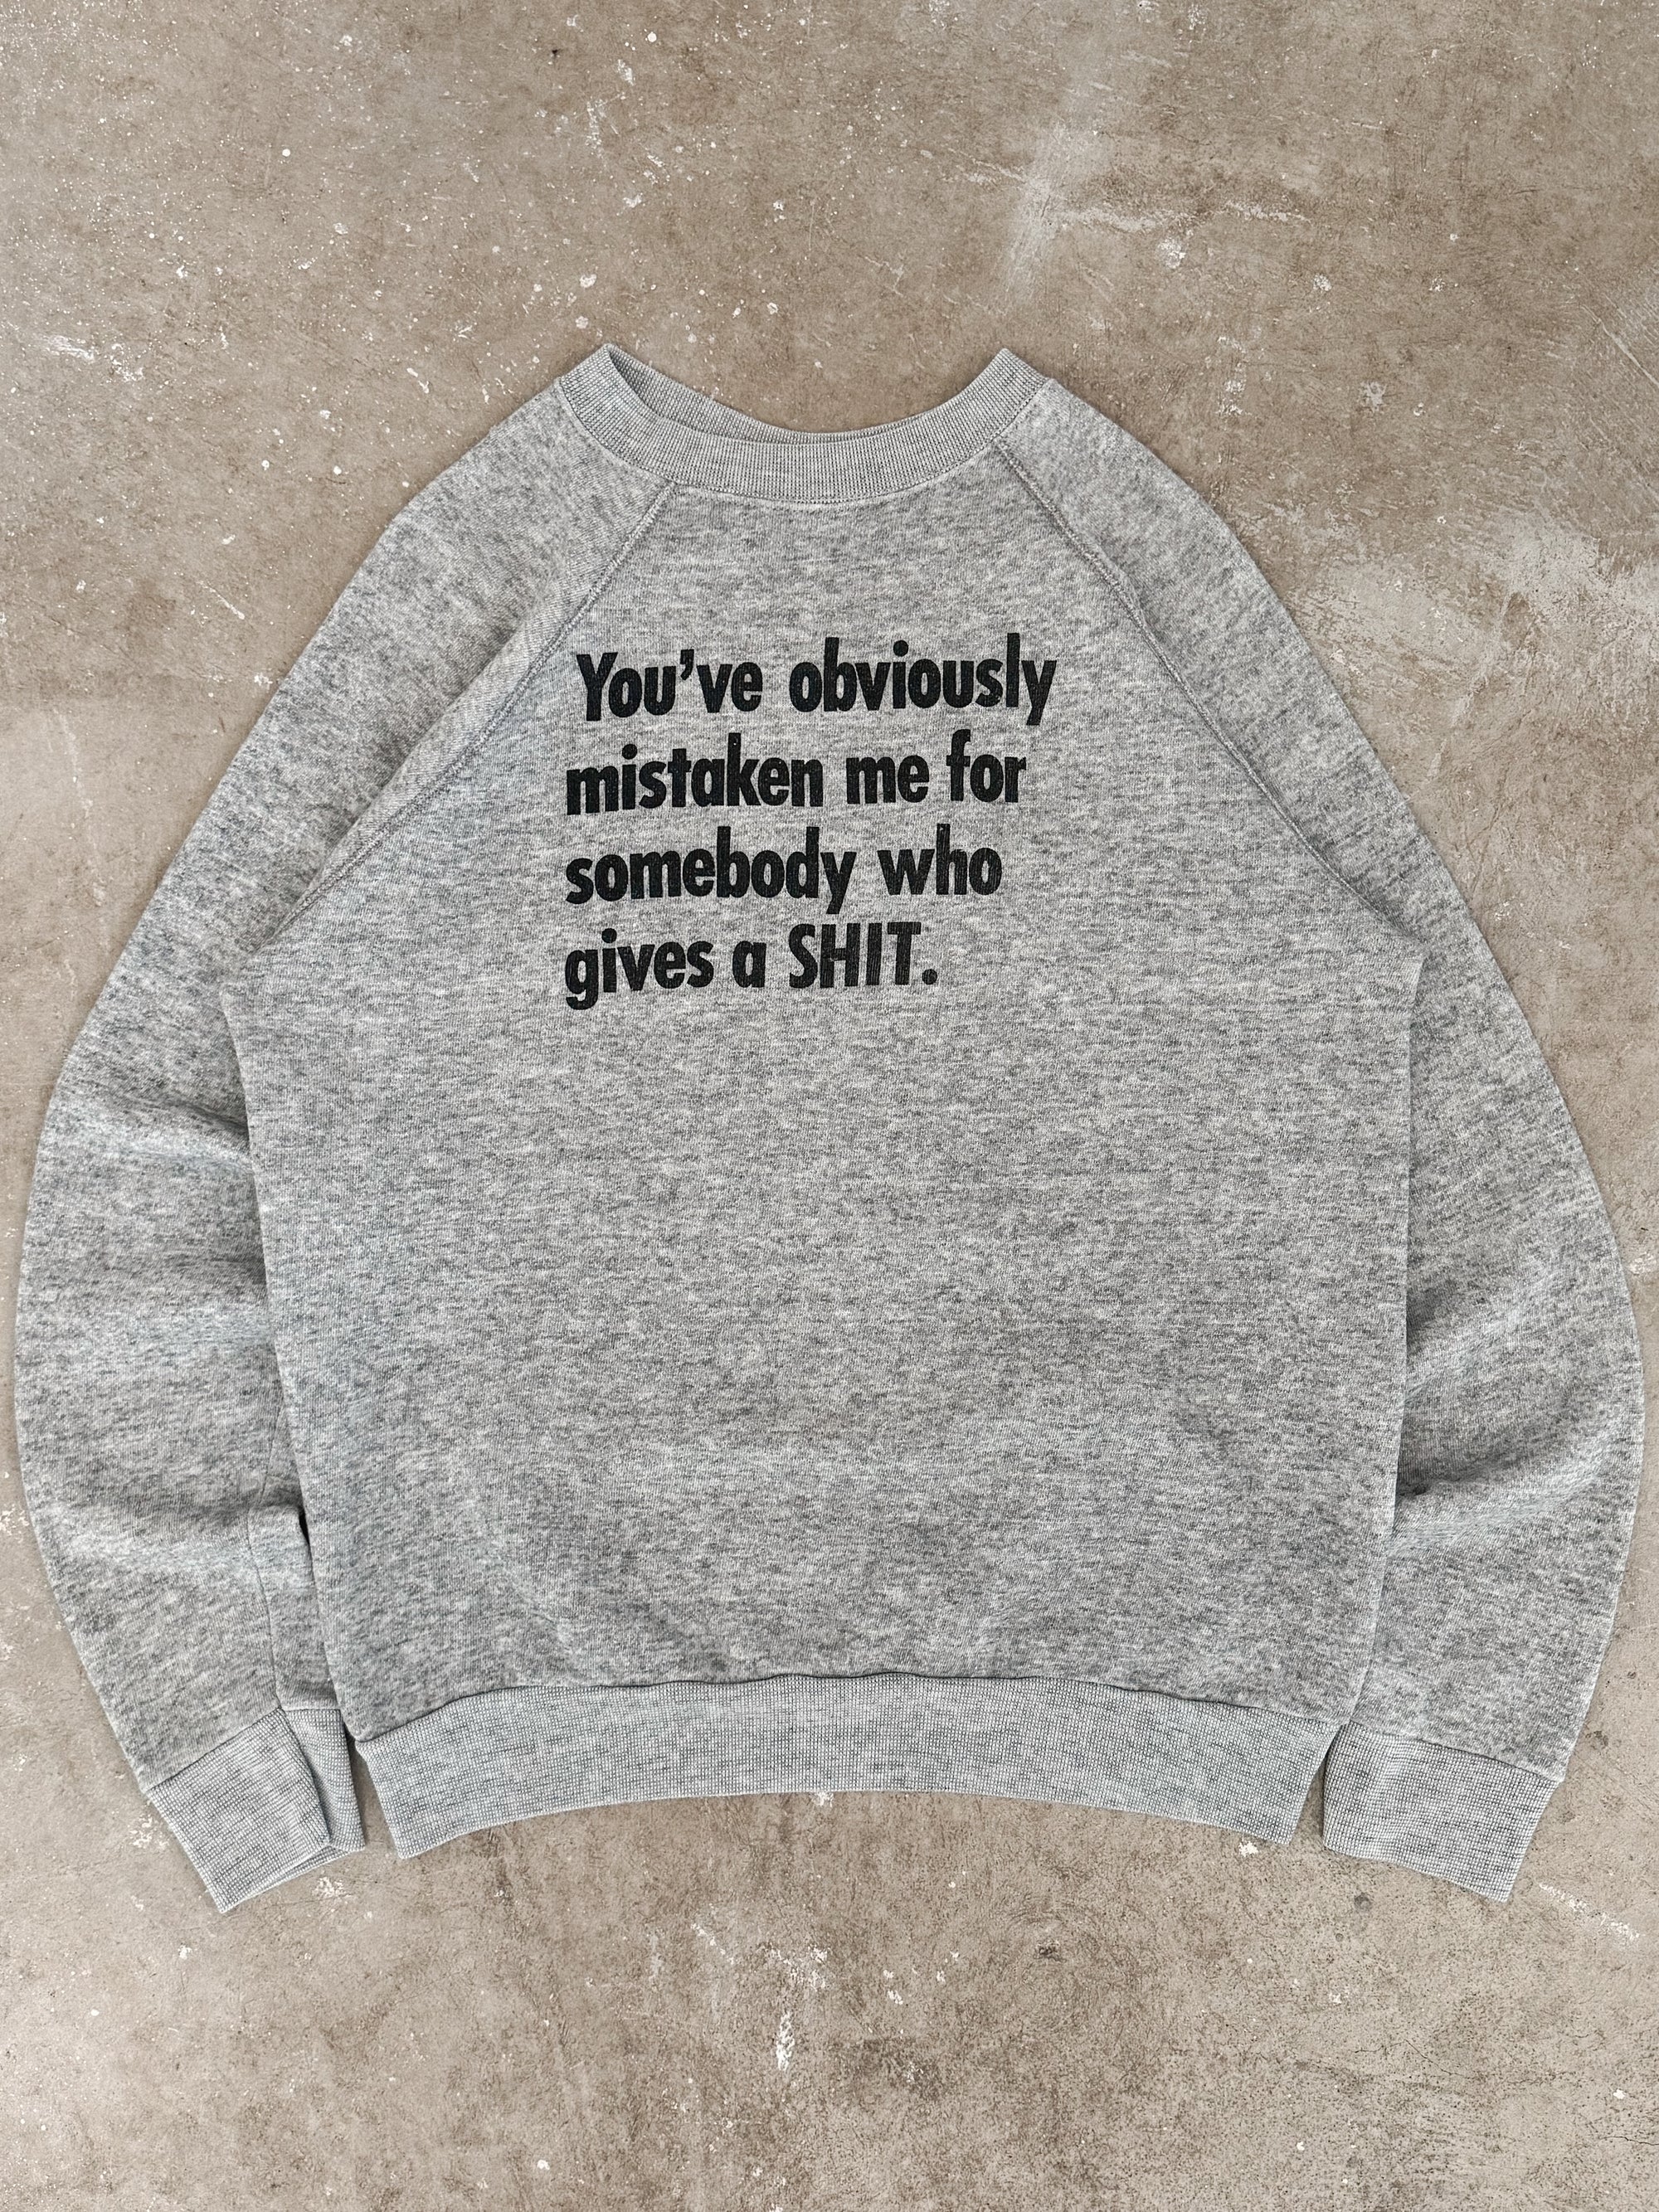 1980s "You've Obviously Mistaken Me..." Sweatshirt (M)